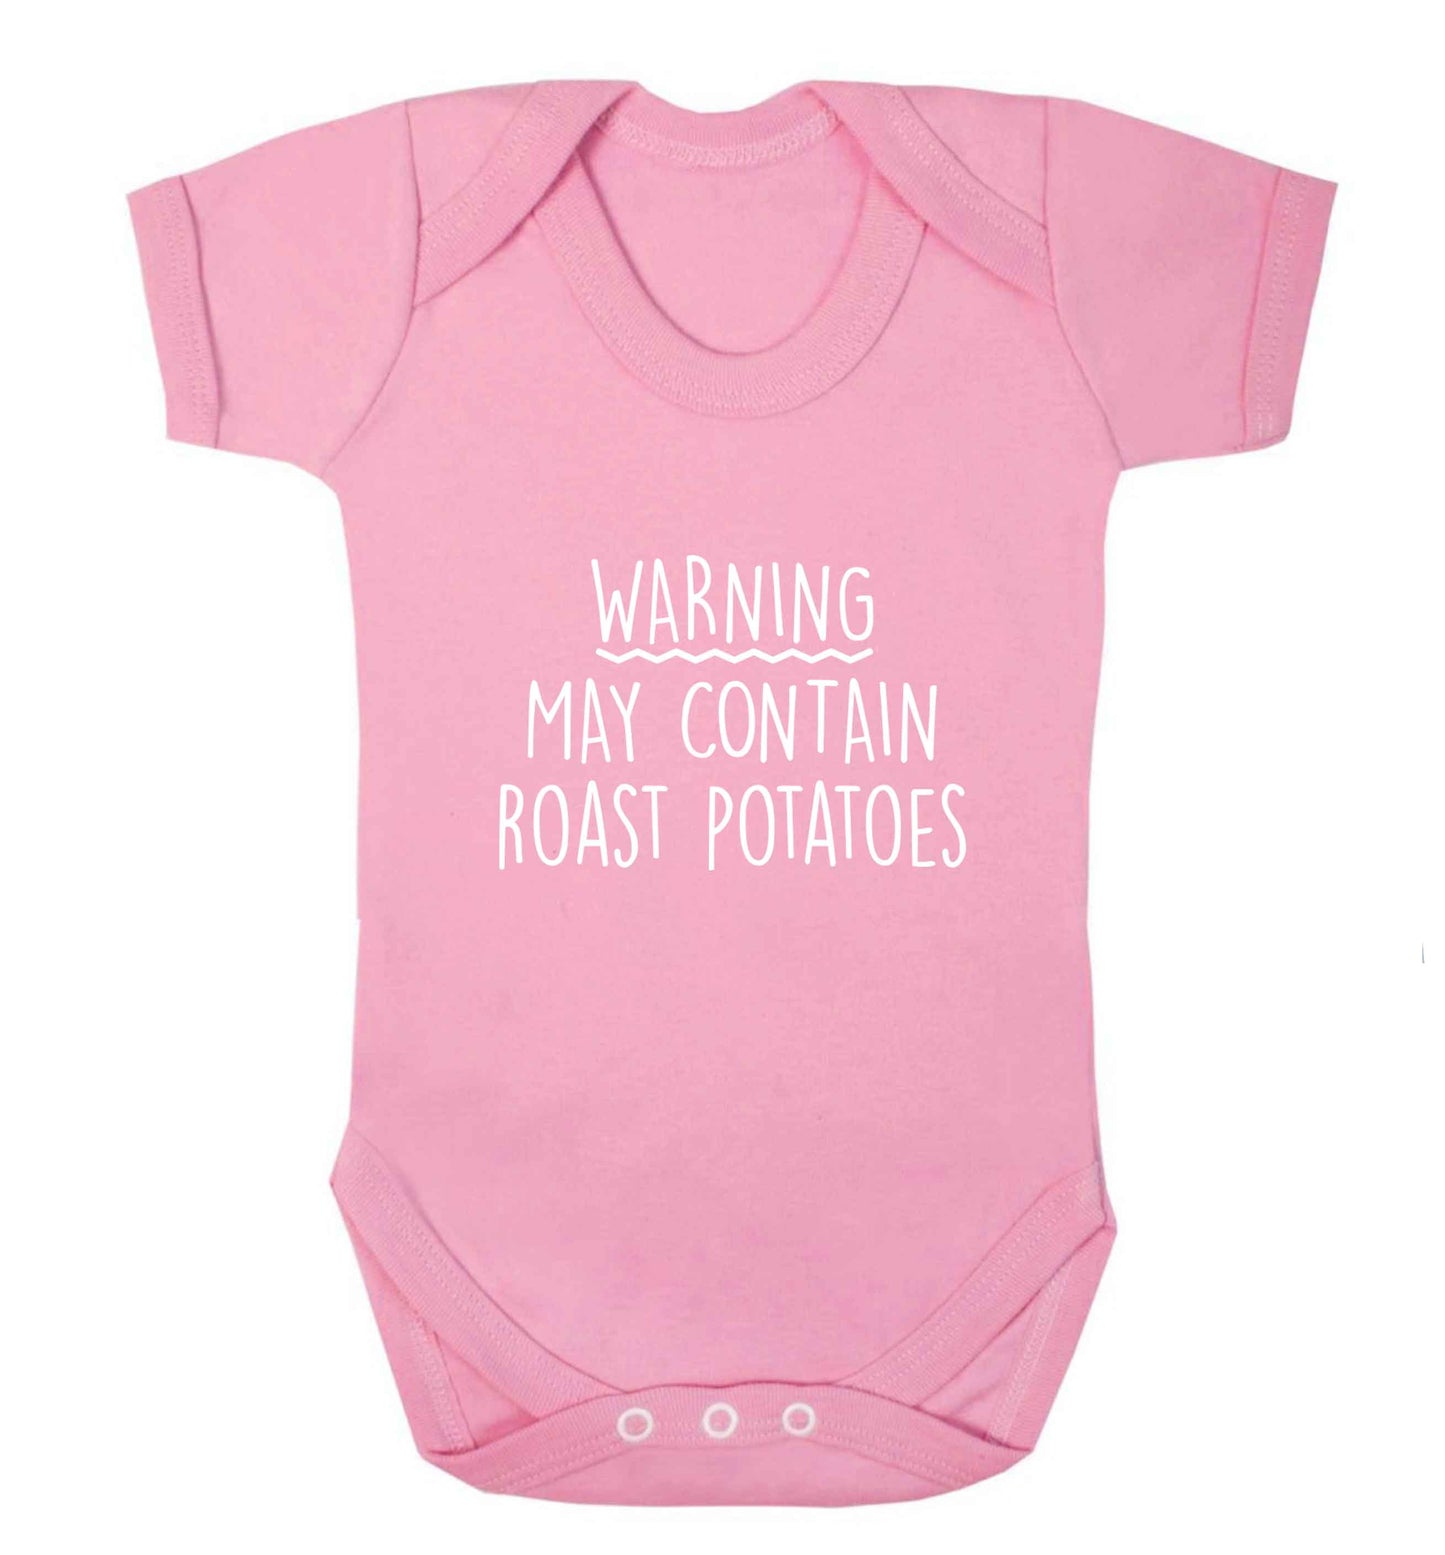 Warning may containg roast potatoes baby vest pale pink 18-24 months